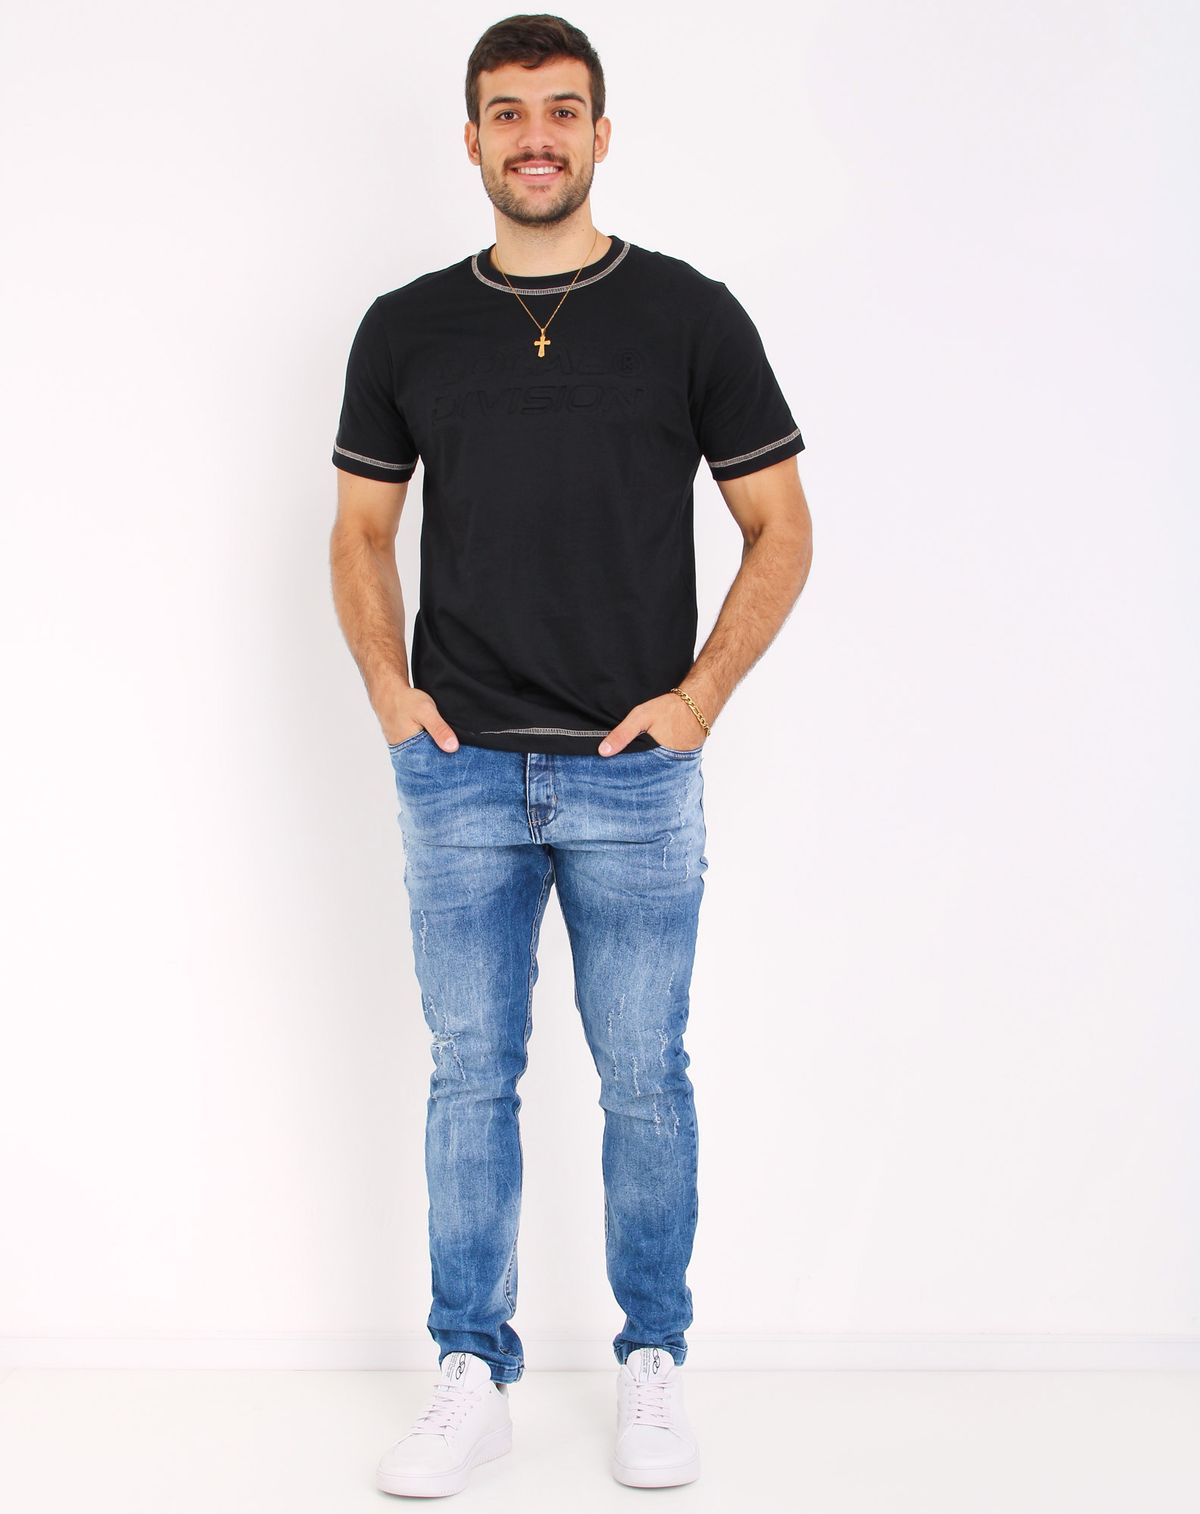 704819001-calca-skinny-jeans-masculina-puidos-jeans-38-0b9